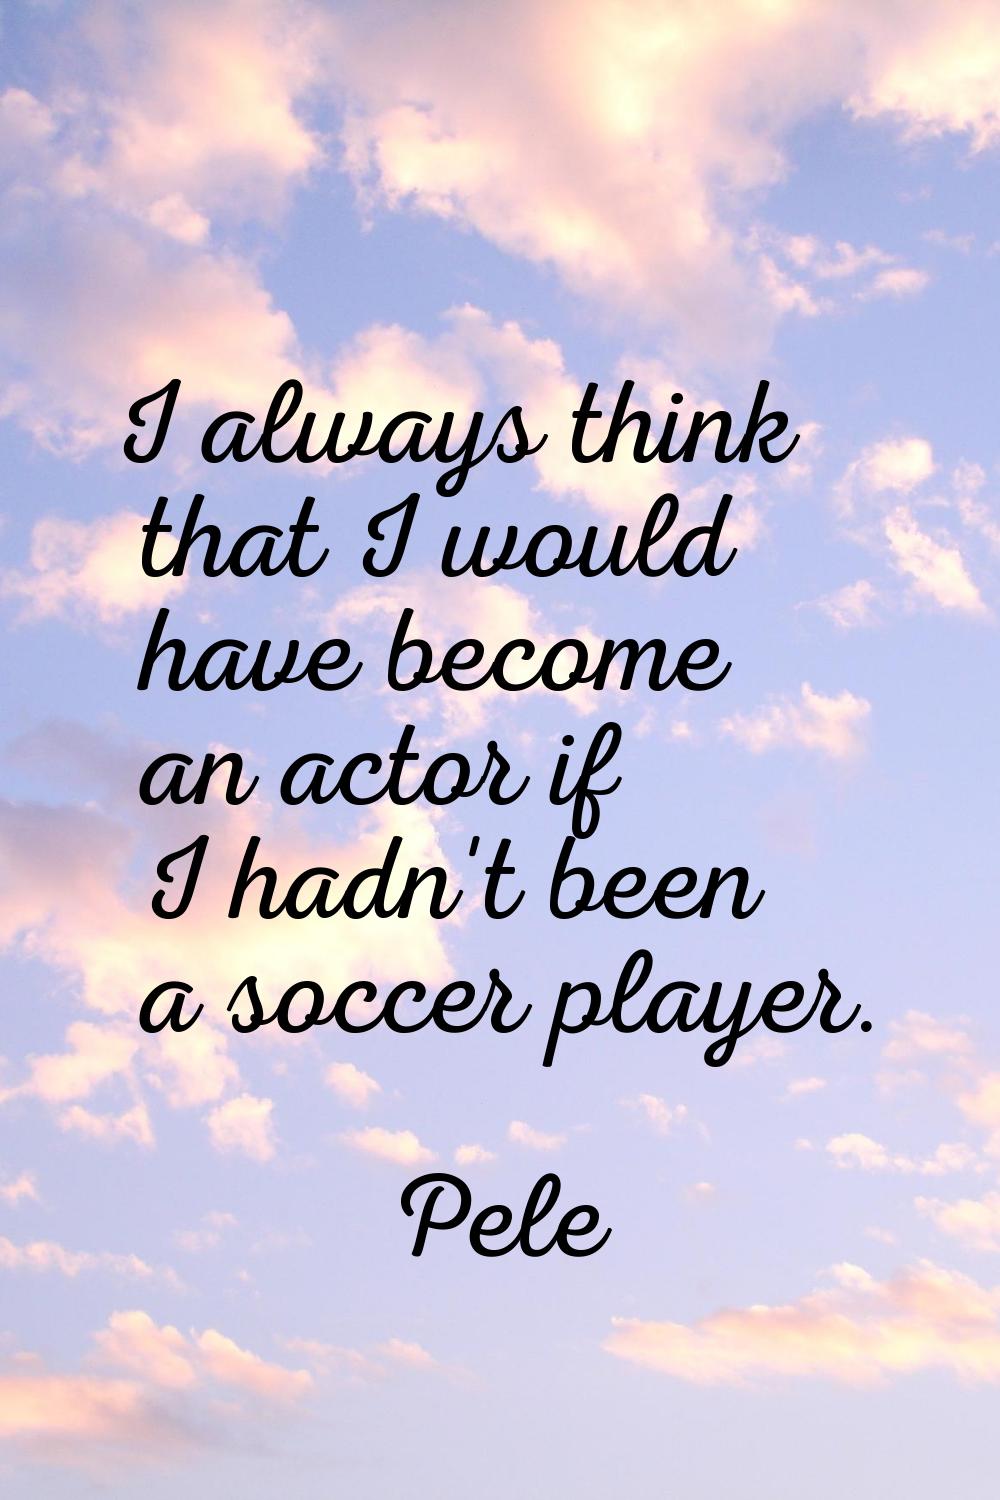 I always think that I would have become an actor if I hadn't been a soccer player.